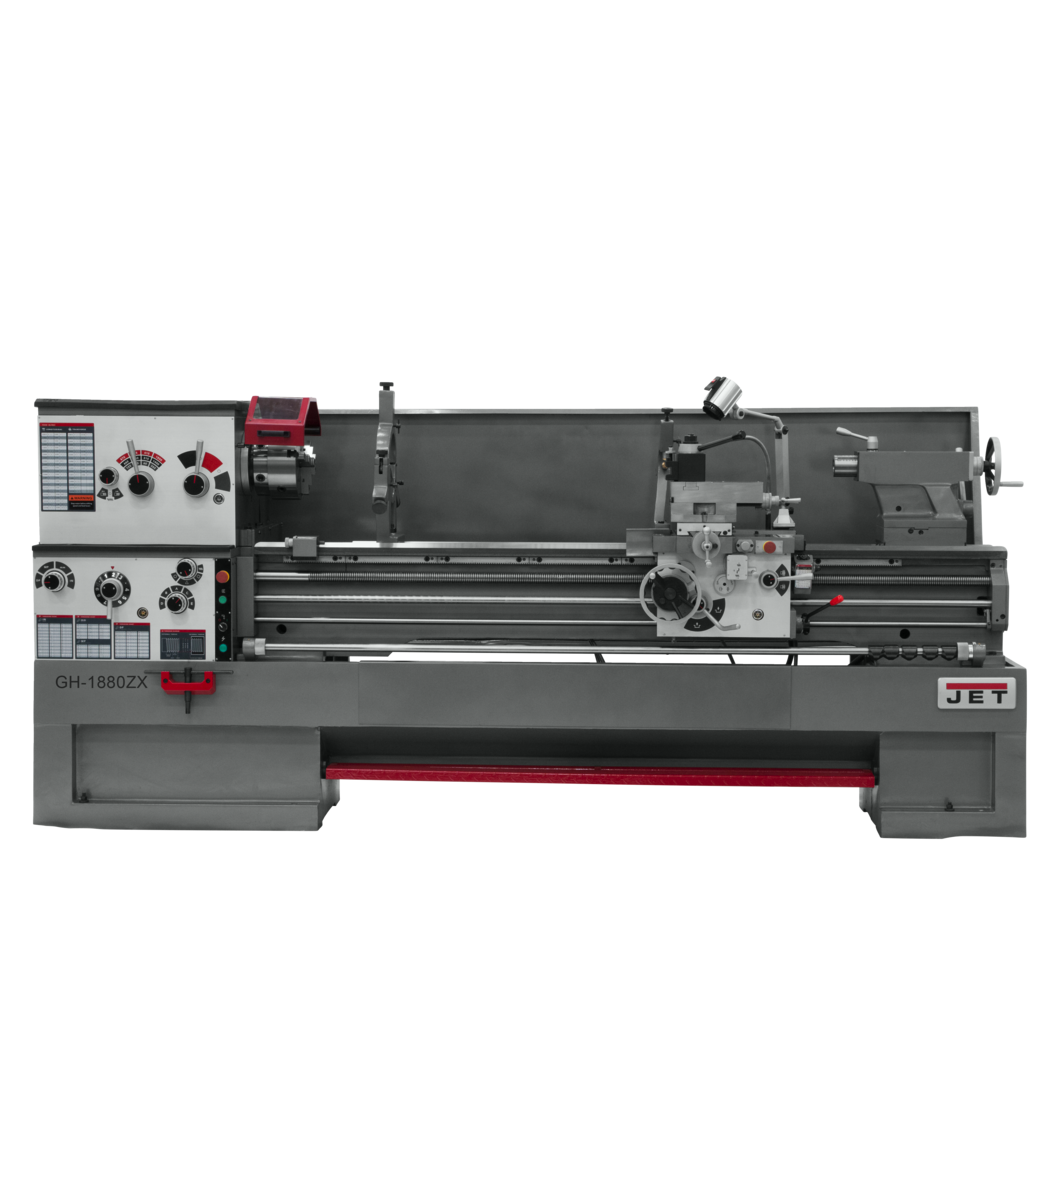 321560, GH-1880ZX Lathe with 2-axis ACU-RITE DRO 203 and Taper Attachment Installed, Jet, Metalworking, Turning, Lathes